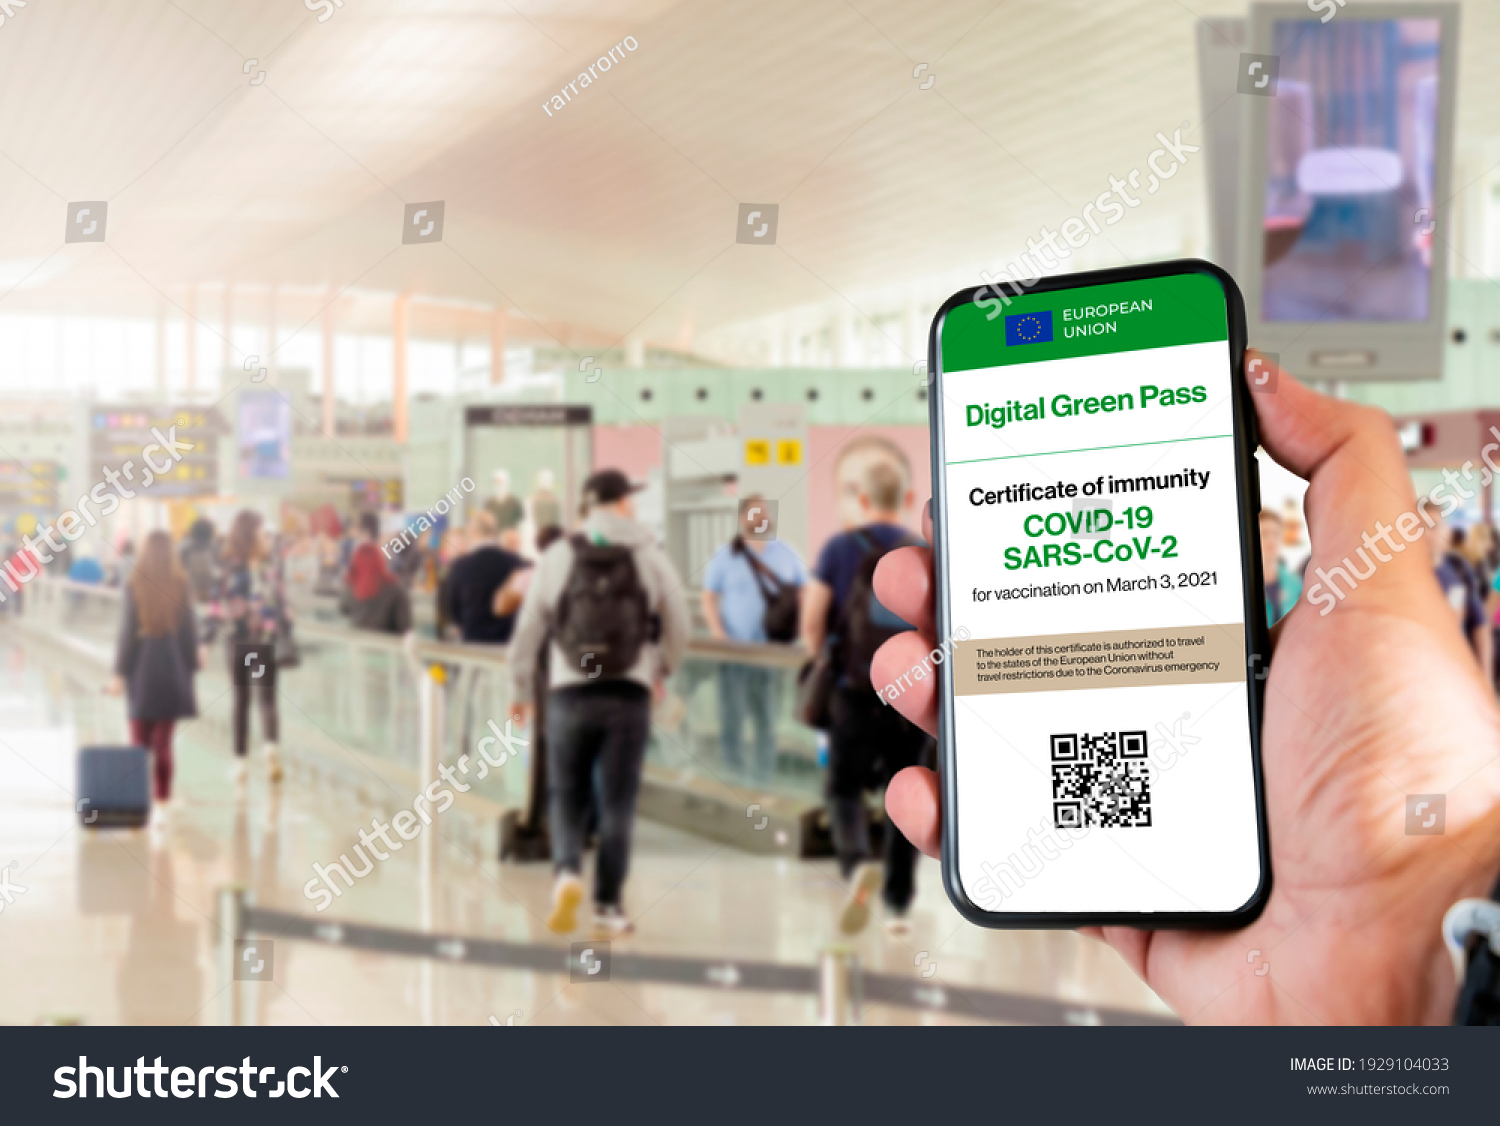 The digital green pass of the european union with the QR code on the screen of a mobile held by a hand with blurred airport in the background. Immunity from Covid-19. Travel without restrictions. #1929104033